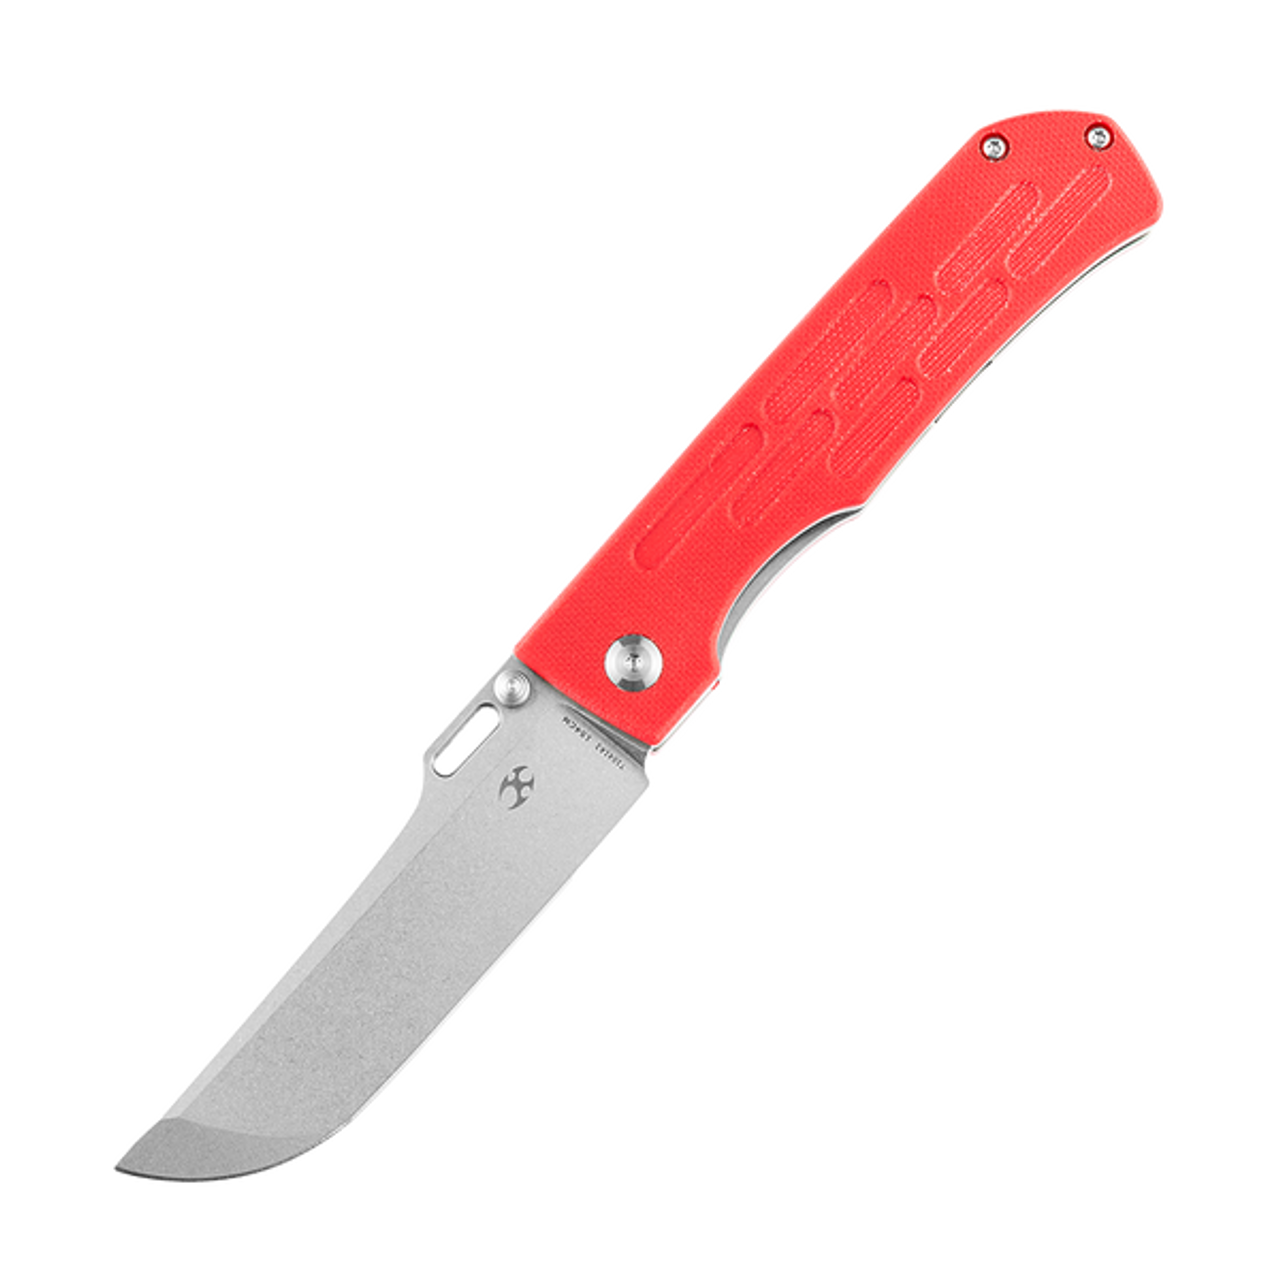 Kansept Knives Reedus (T1041A2) 3.5" Stonewashed 154CM Clip Point Plain Blade, Red G-10 Handle